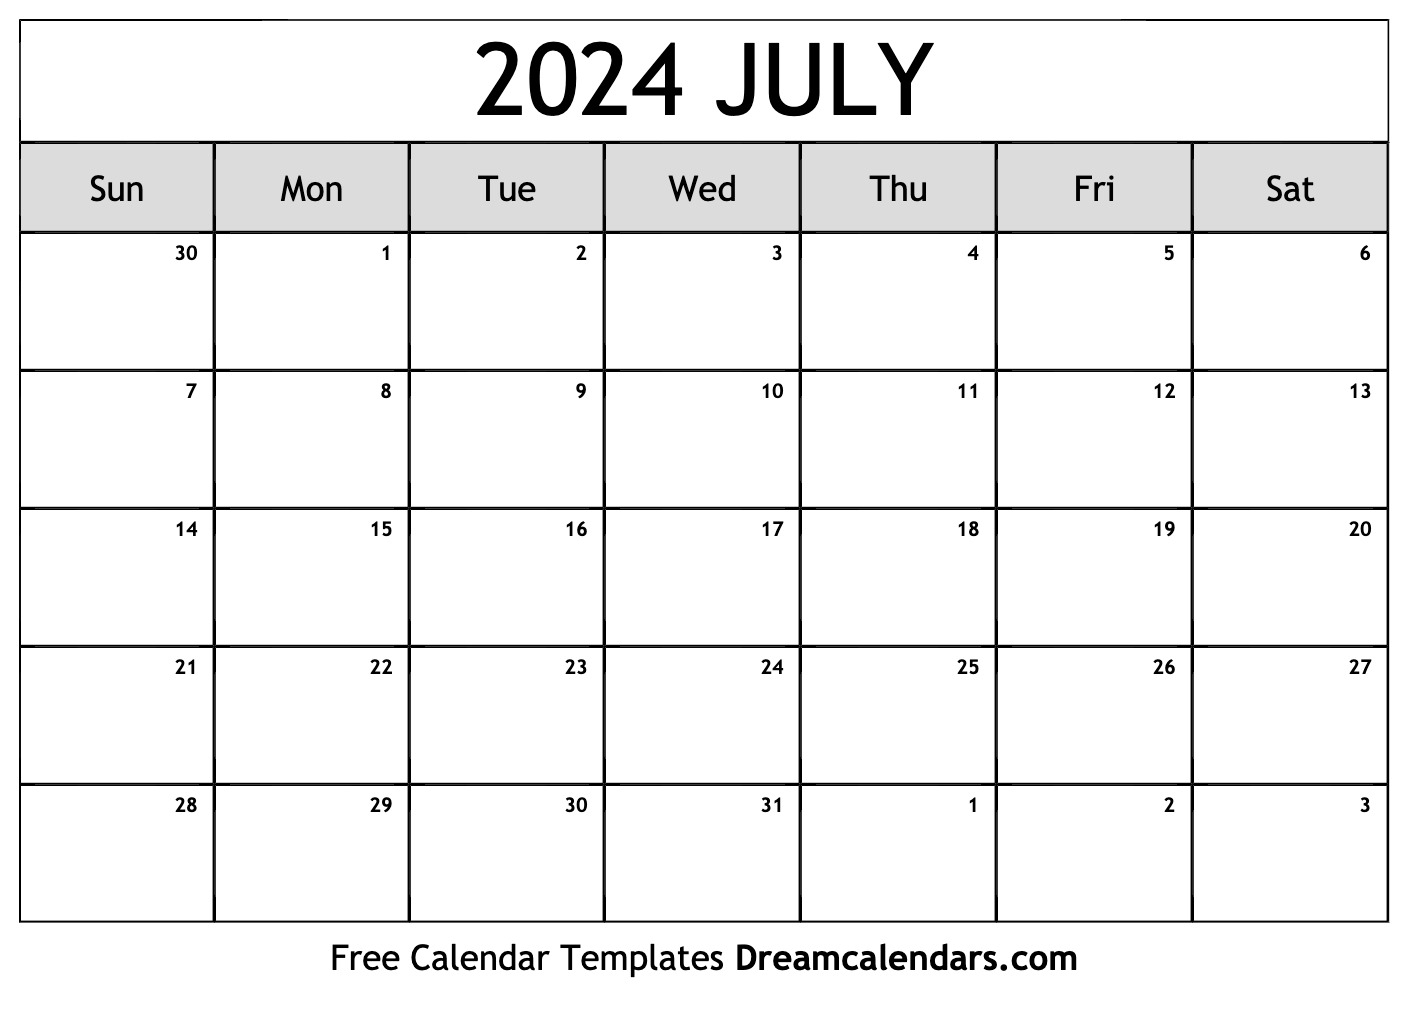 July 2024 Calendar | Free Blank Printable With Holidays for July Calendar Printable 2024